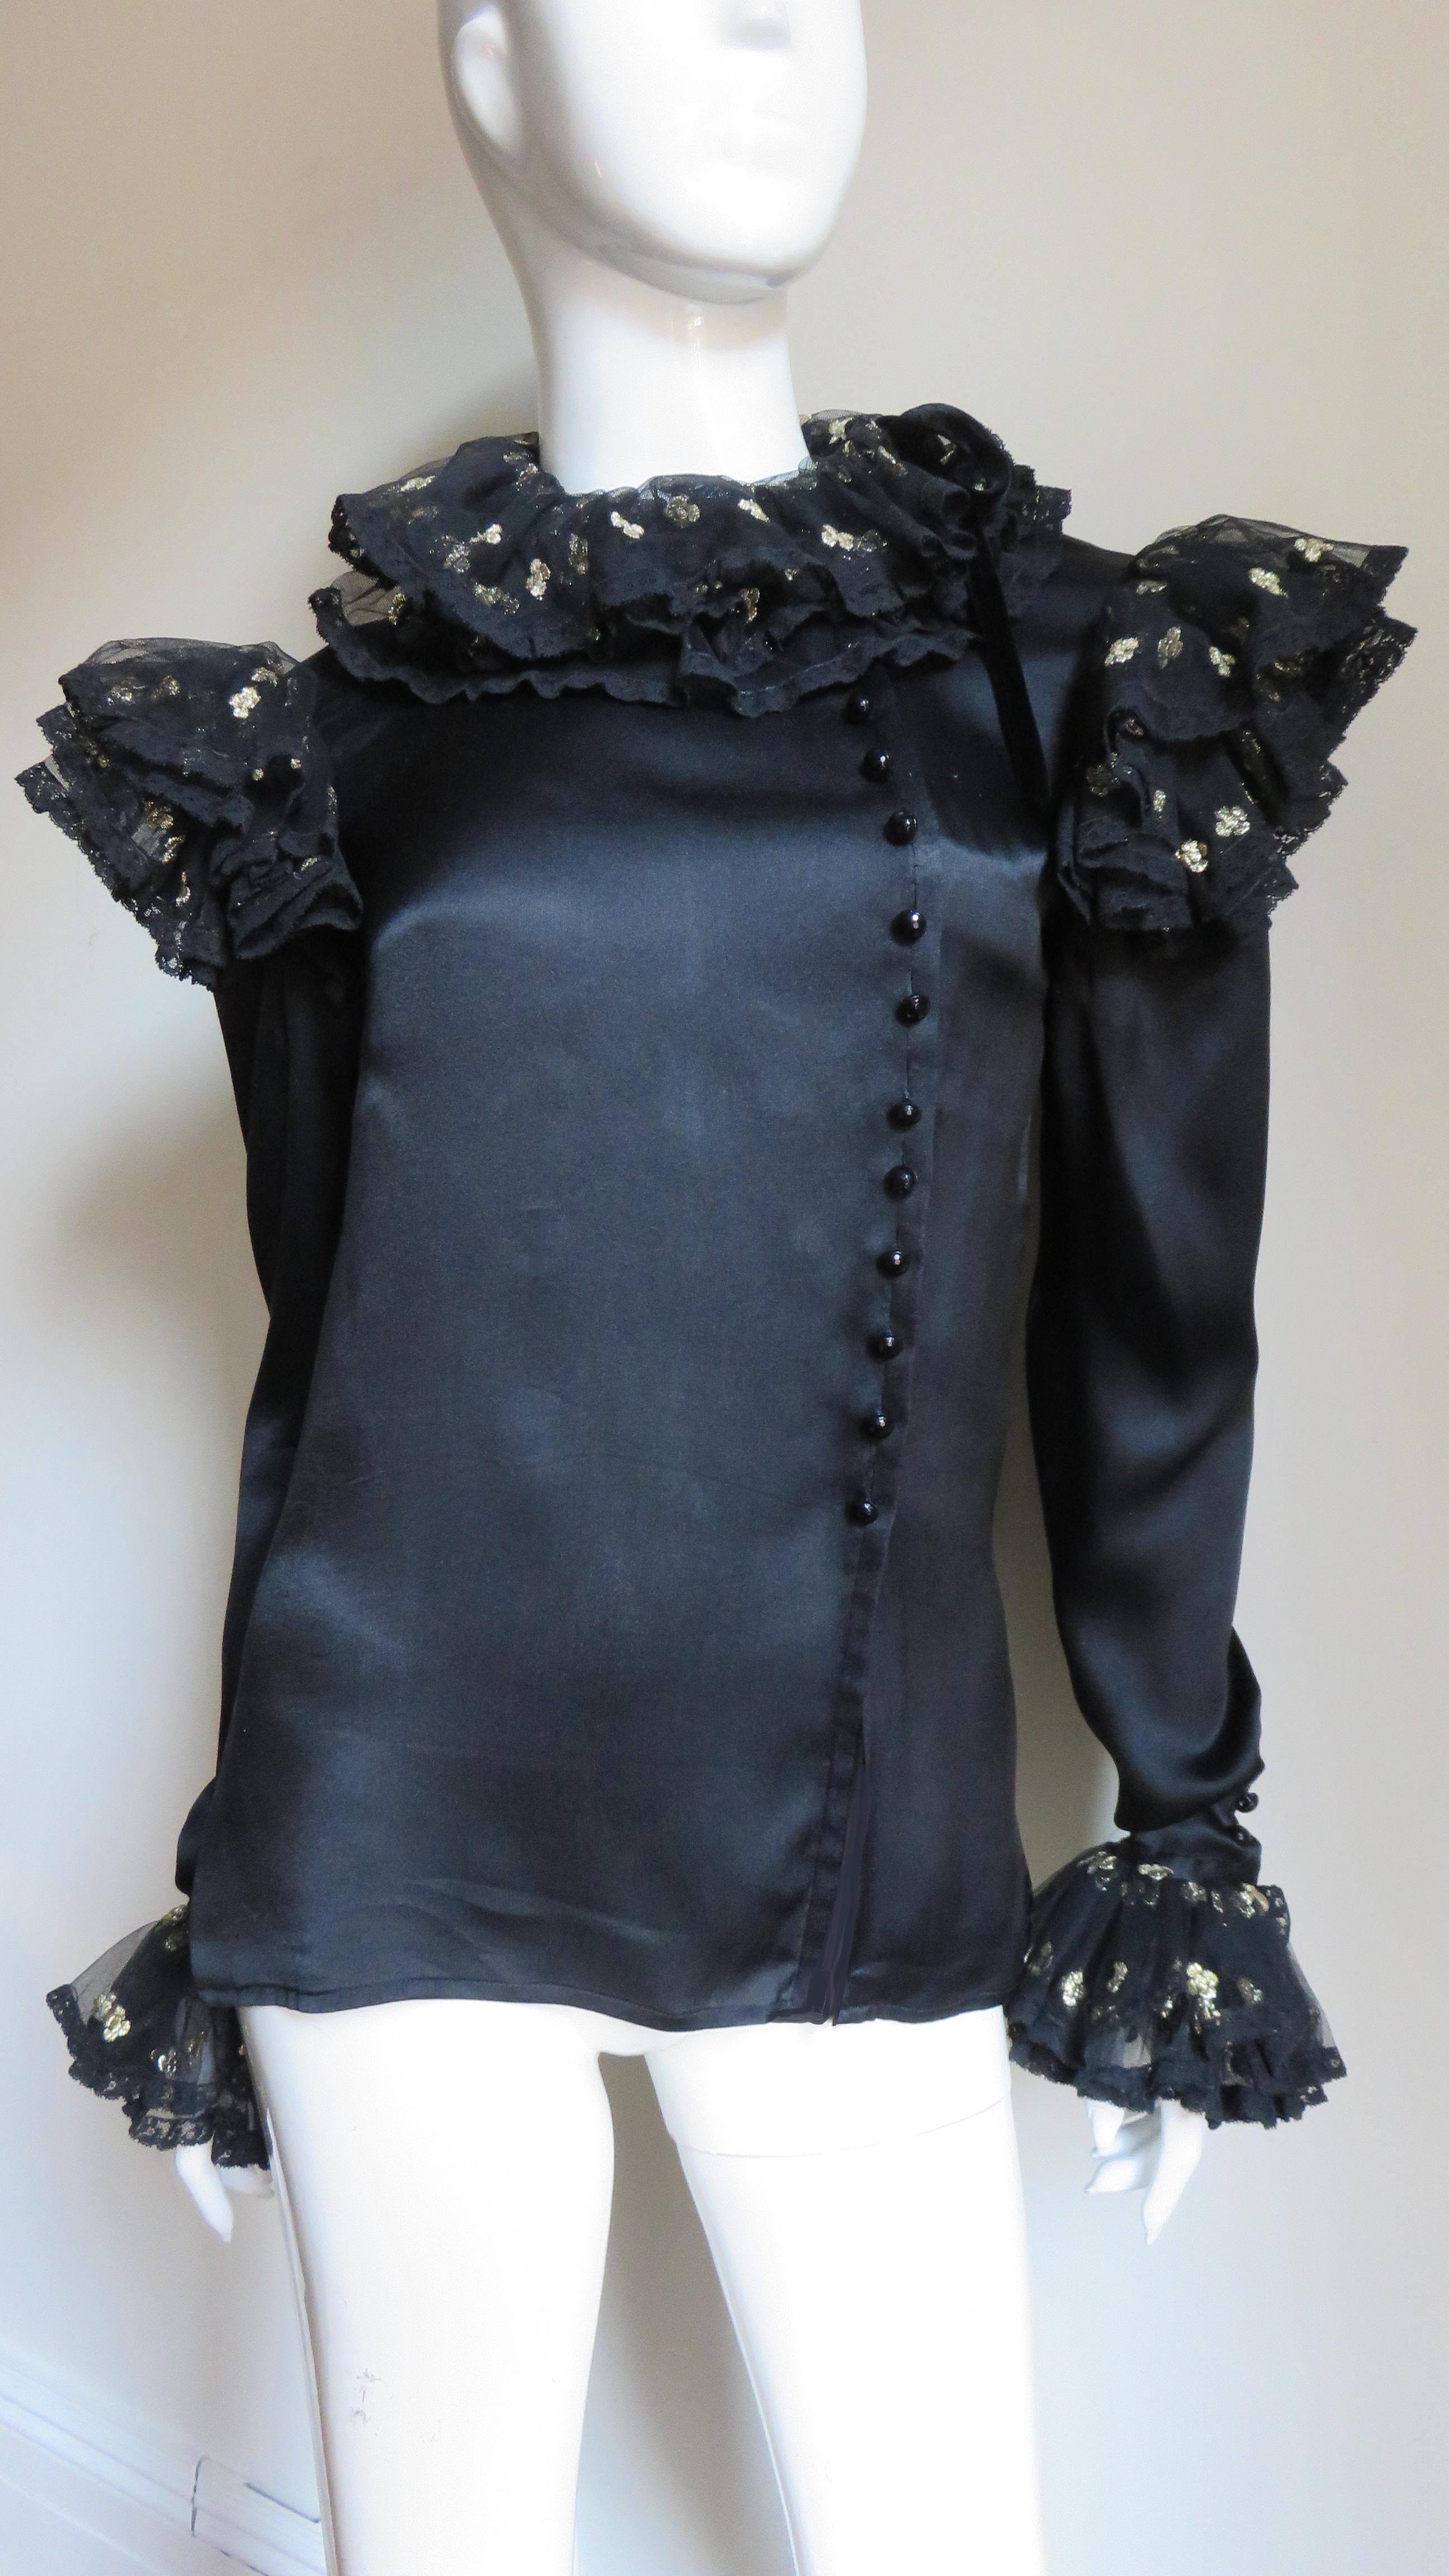 A gorgeous black silk charmeuse blouse shirt by Valentino.  It buttons on the side front with delicate black faceted glass buttons and is adorned with layers of beautiful gold flower dotted black lace at the neck, shoulders and cuffs of the long